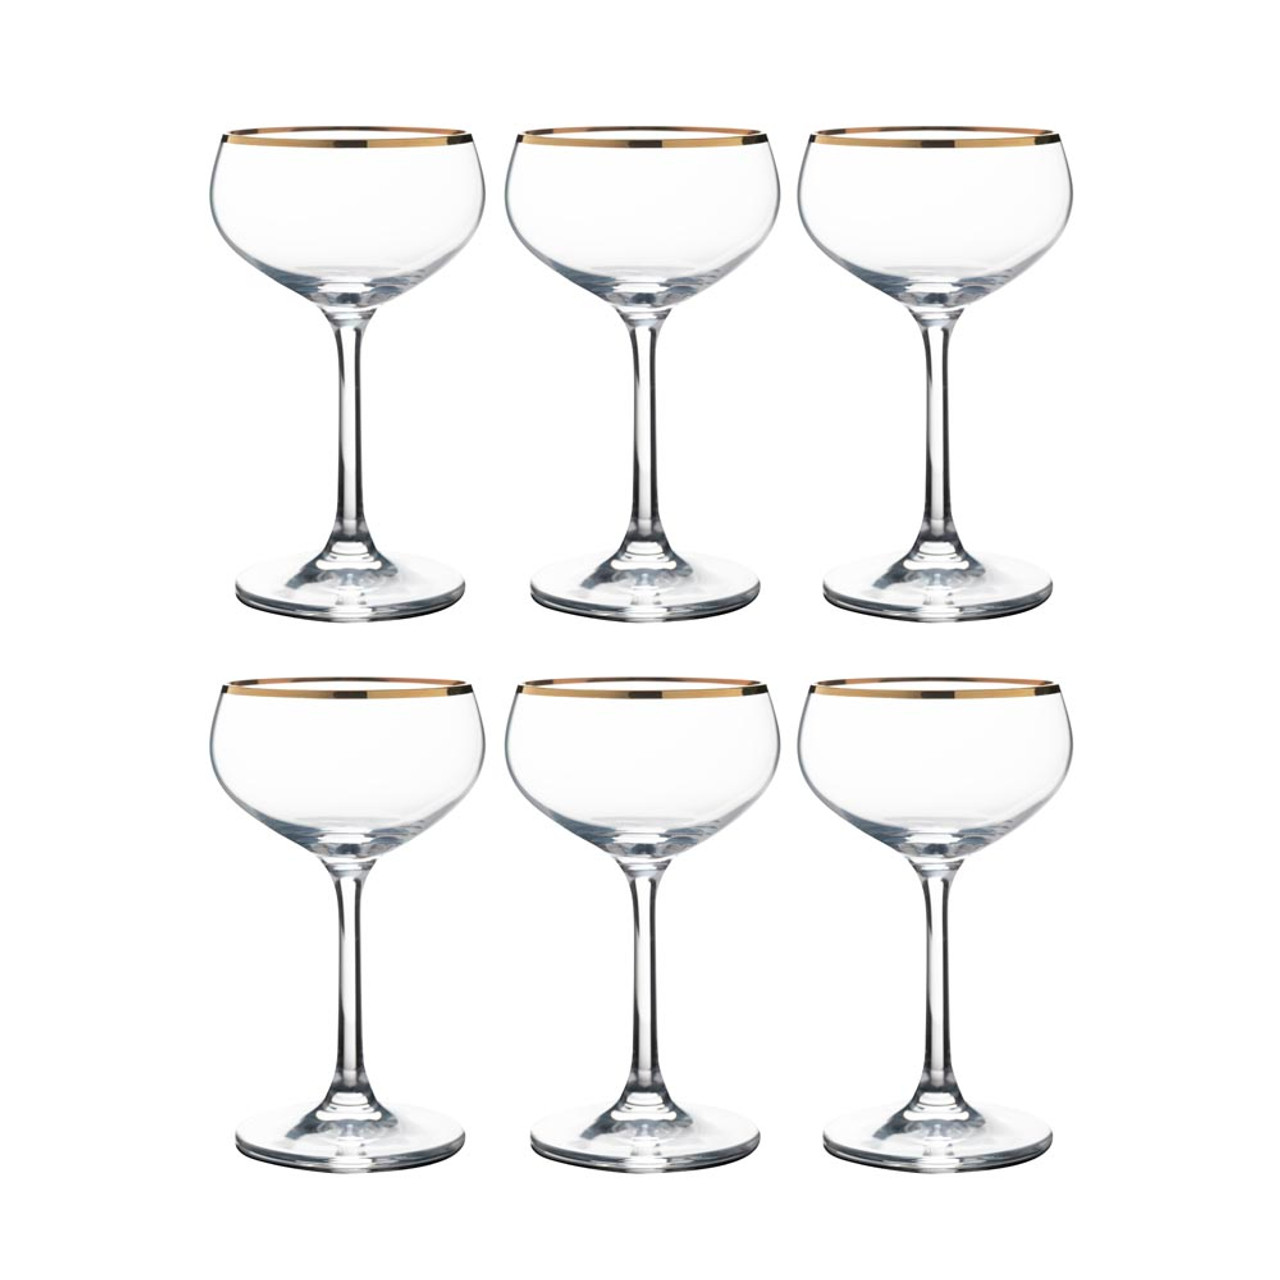 https://cdn11.bigcommerce.com/s-cznxq08r7/images/stencil/1280x1280/products/853/9331/ub2977_urban_bar_retro_crystal_coupe_glasses_with_gold_plated_rims_-_7.1_oz_-_set_of_6---001__38554.1590772601.jpg?c=1